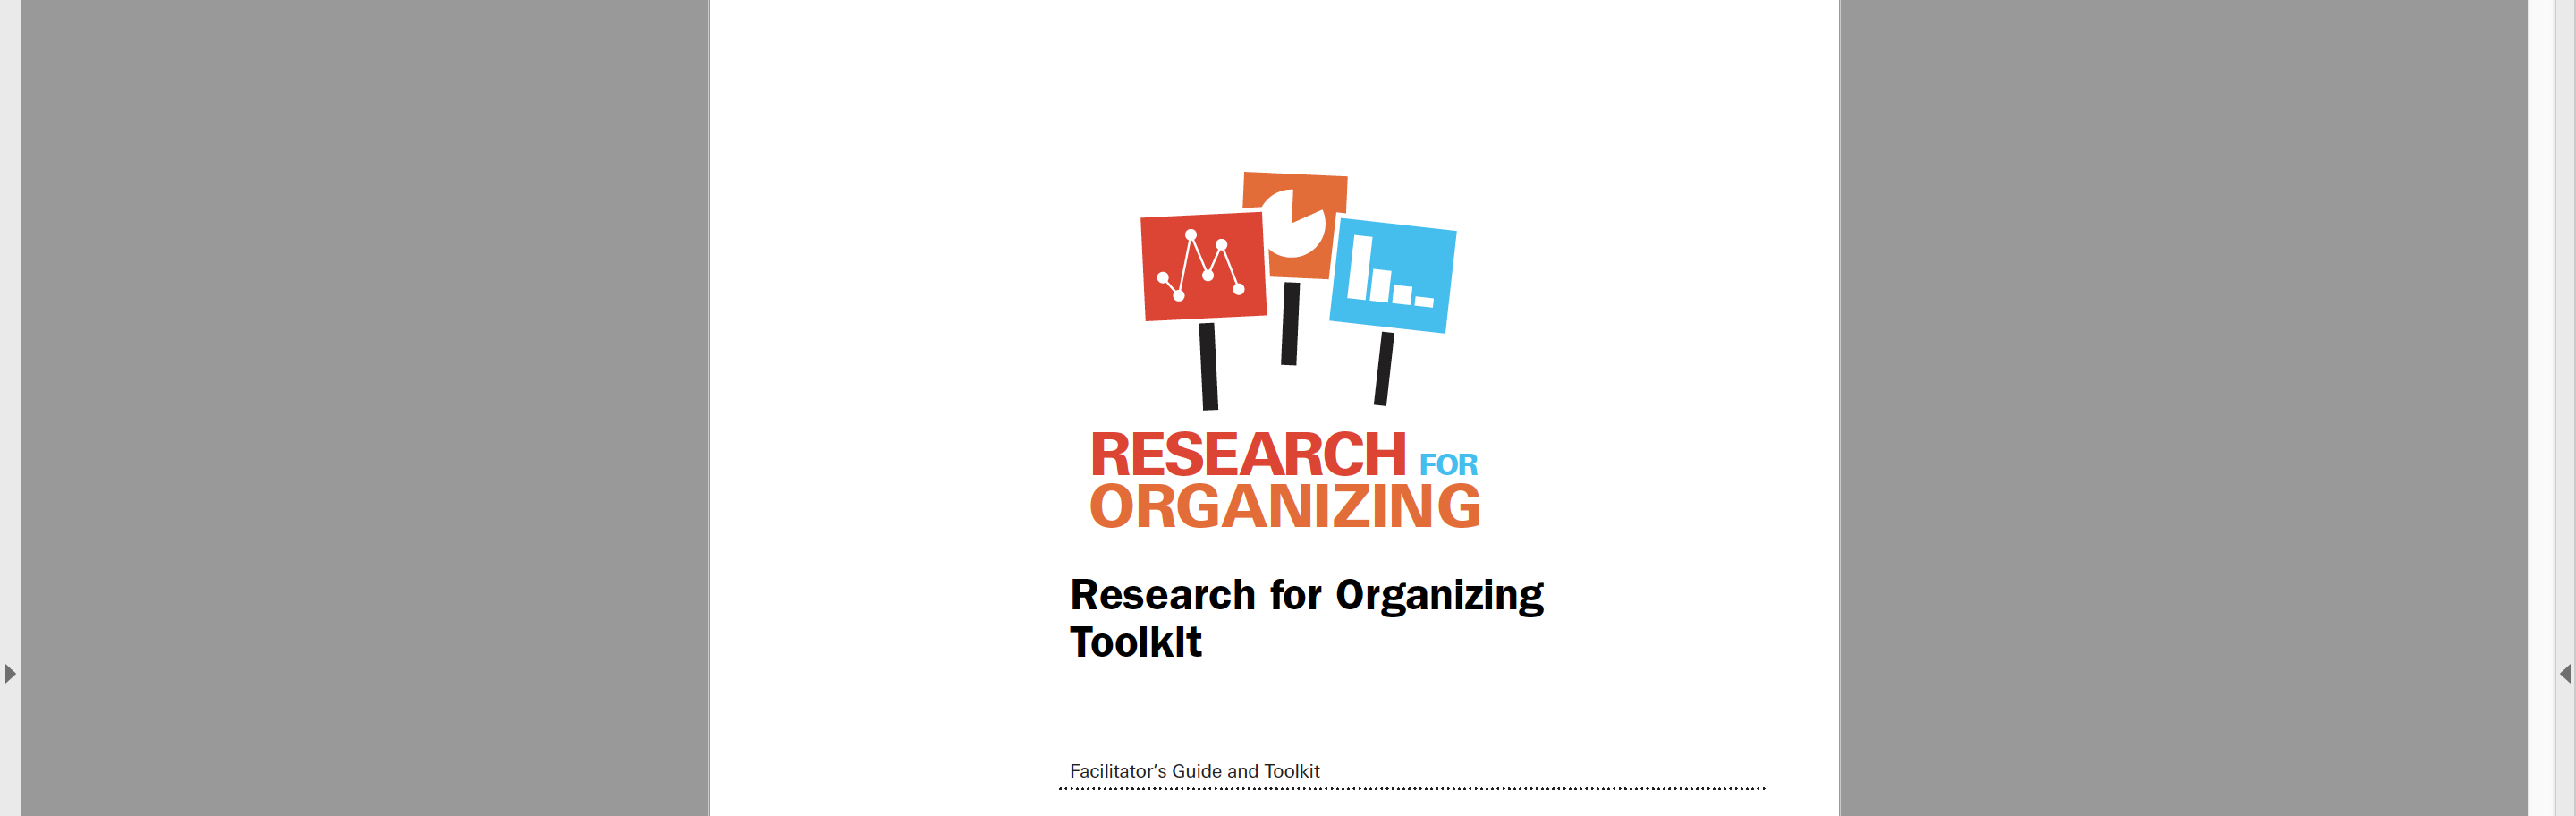 Research for Organizing Toolkit